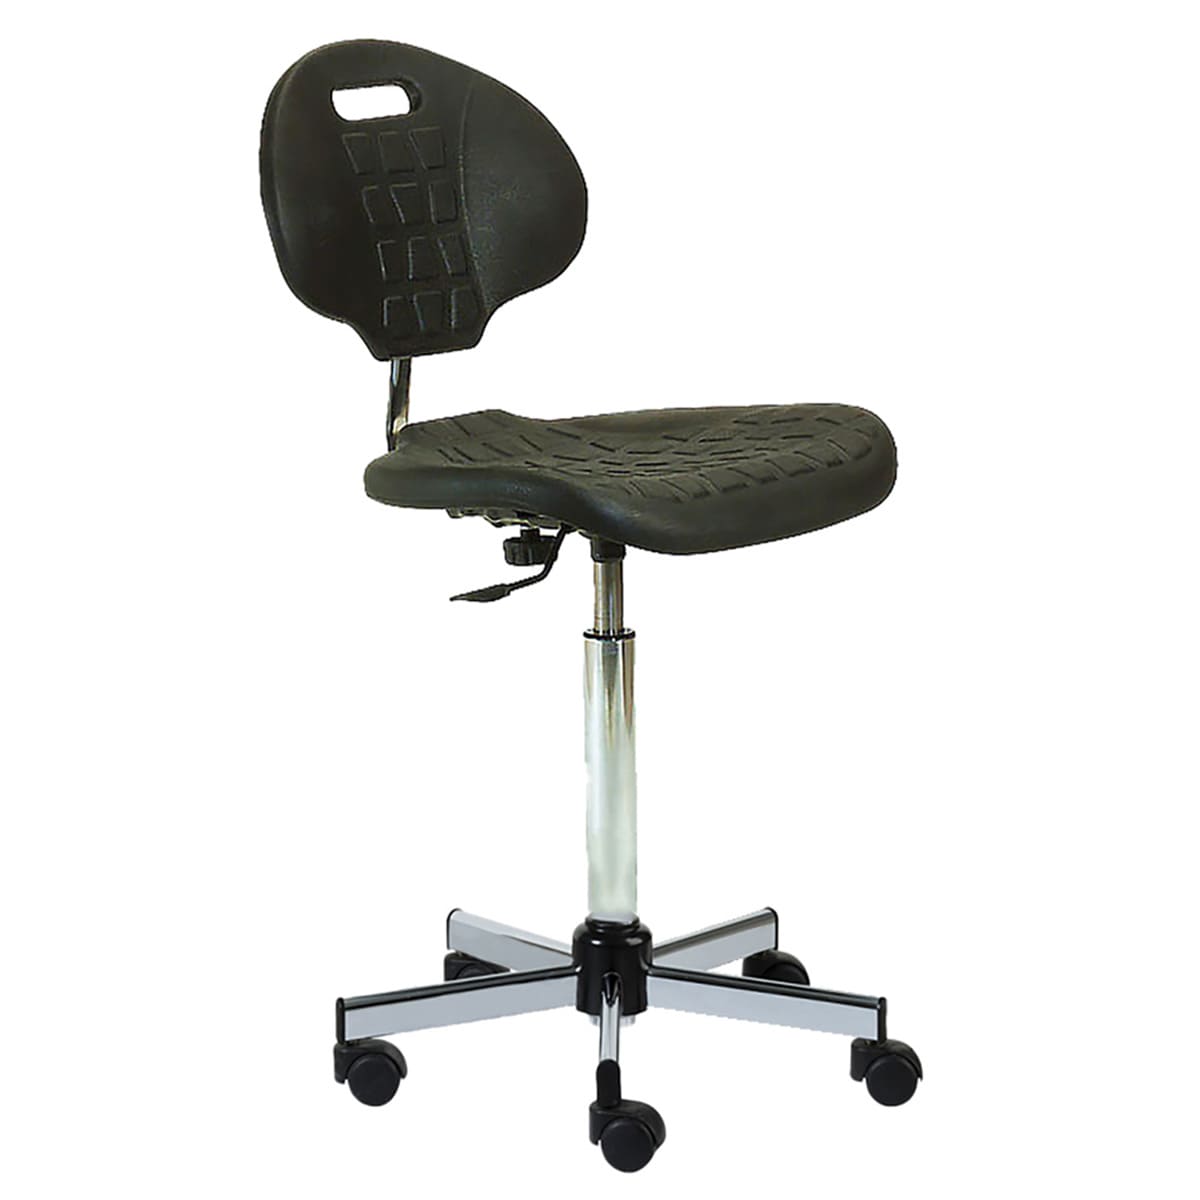 Chair with polyurethane rectangular seat, stainless steel base